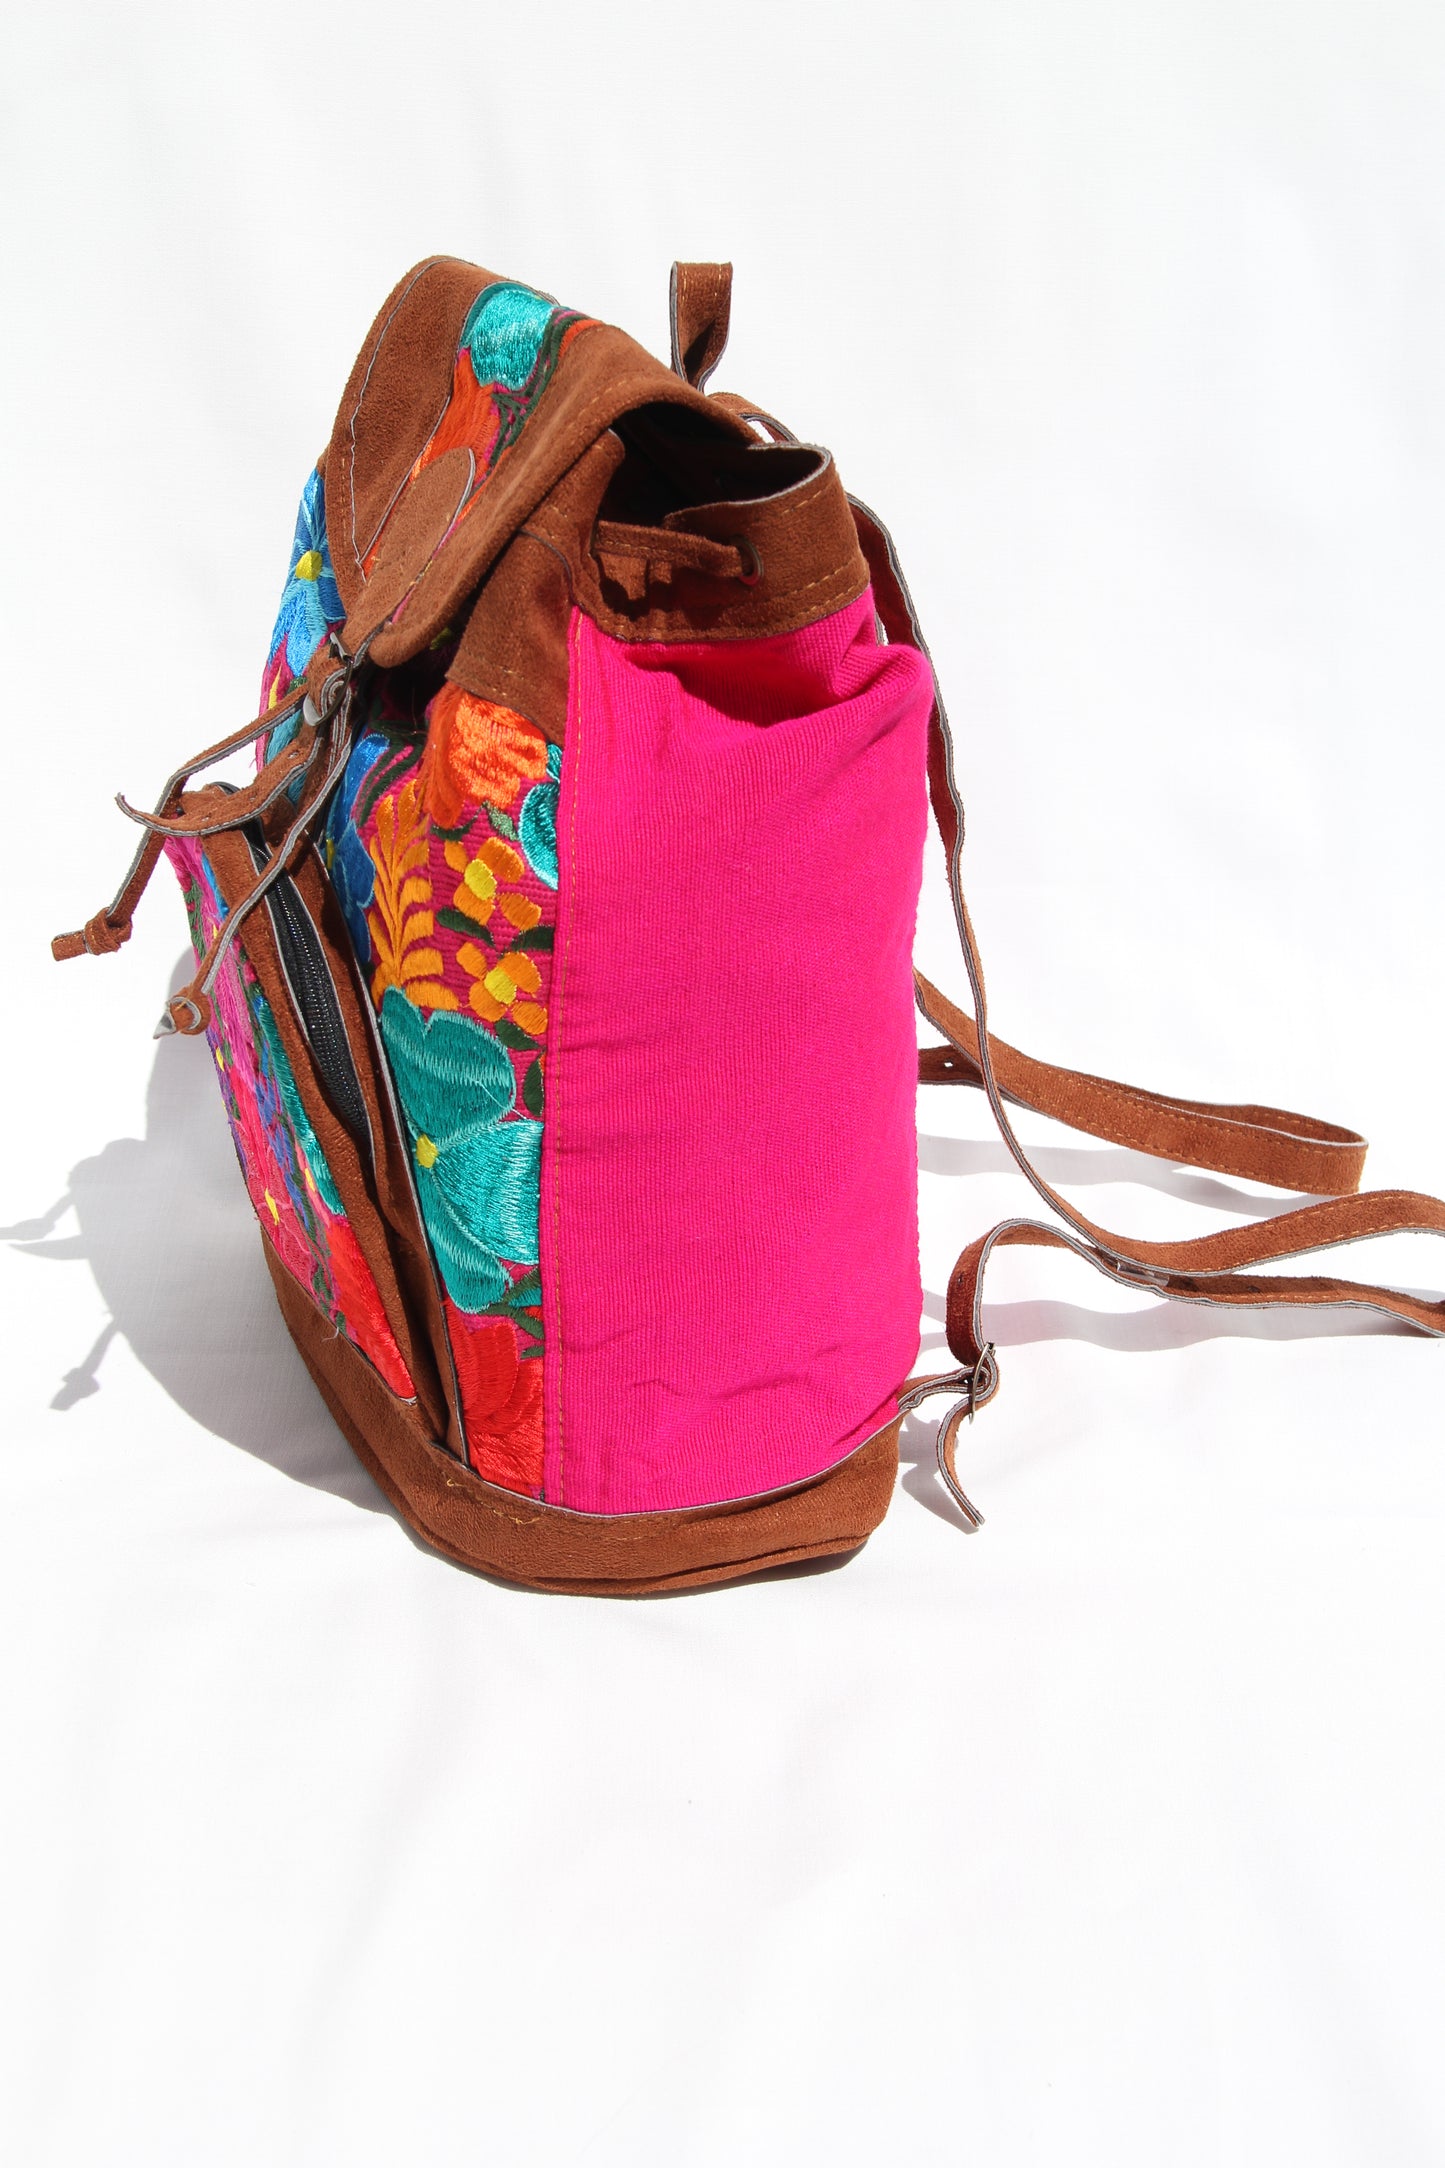 colorful huipil floral embroidery backpack with pink woven fabric and faux suede contrast with adjustable straps and front buckle closure with front zipper pocket the prefect travel, hiking or beach bag unique bag great for back to school take this bag on your next destination boho bag and hippie style bag a great standout accessories made in Guatemala